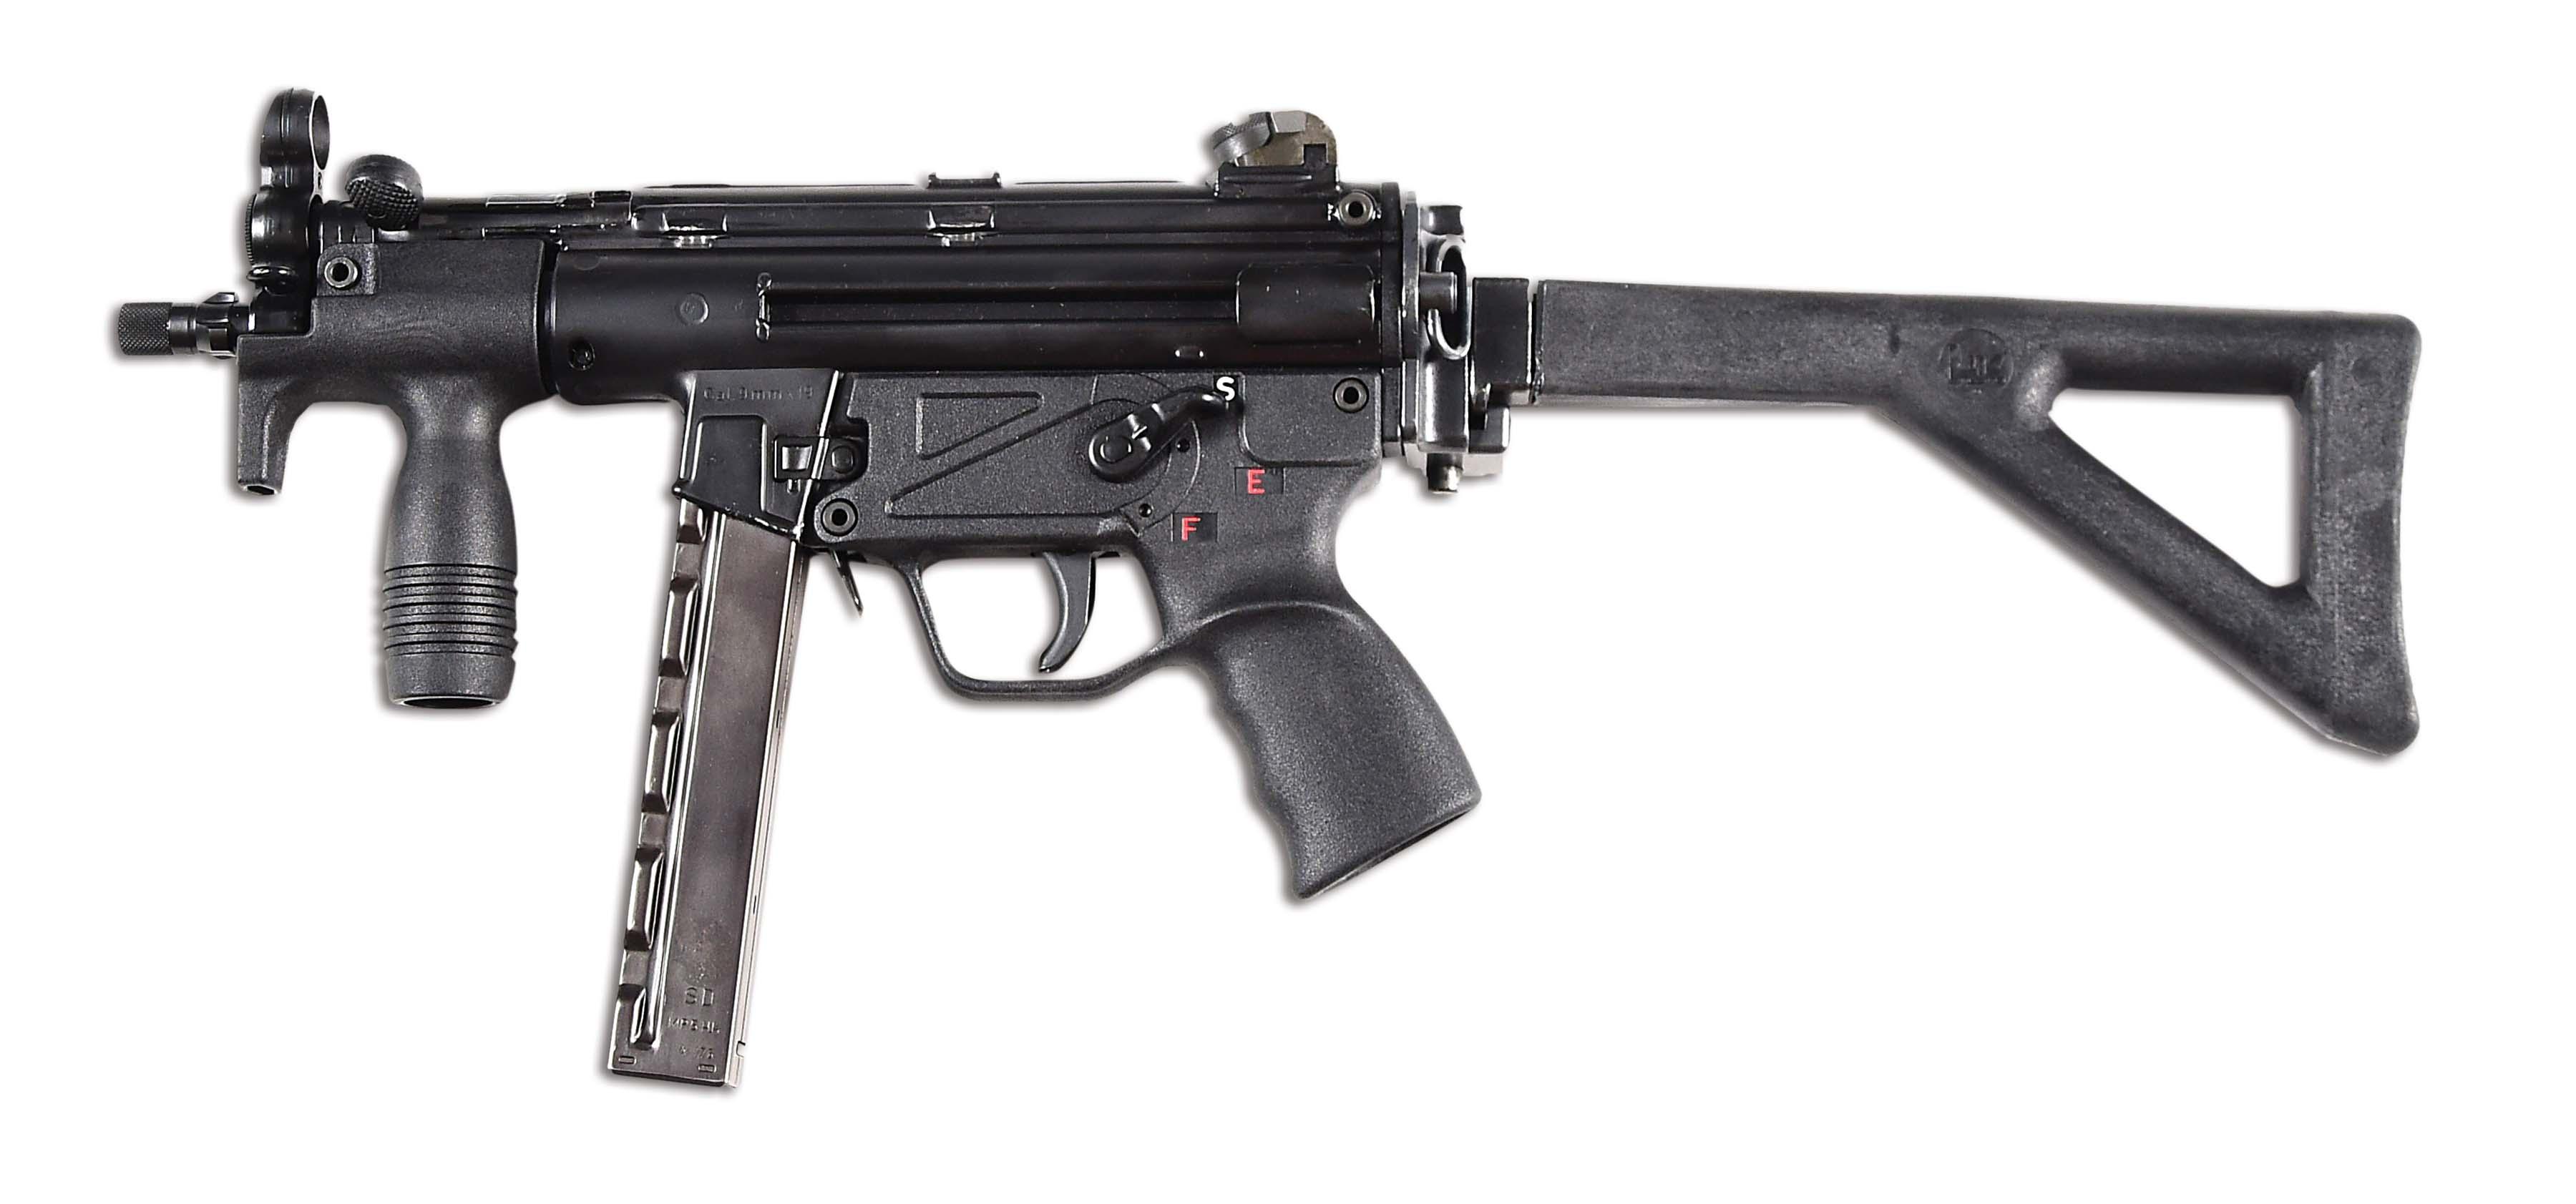 (N) VERY DESIRABLE S & H ARMS REGISTERED RECEIVER HK 94 CONVERTED TO MP5K FOLDING STOCK MACHINE GUN